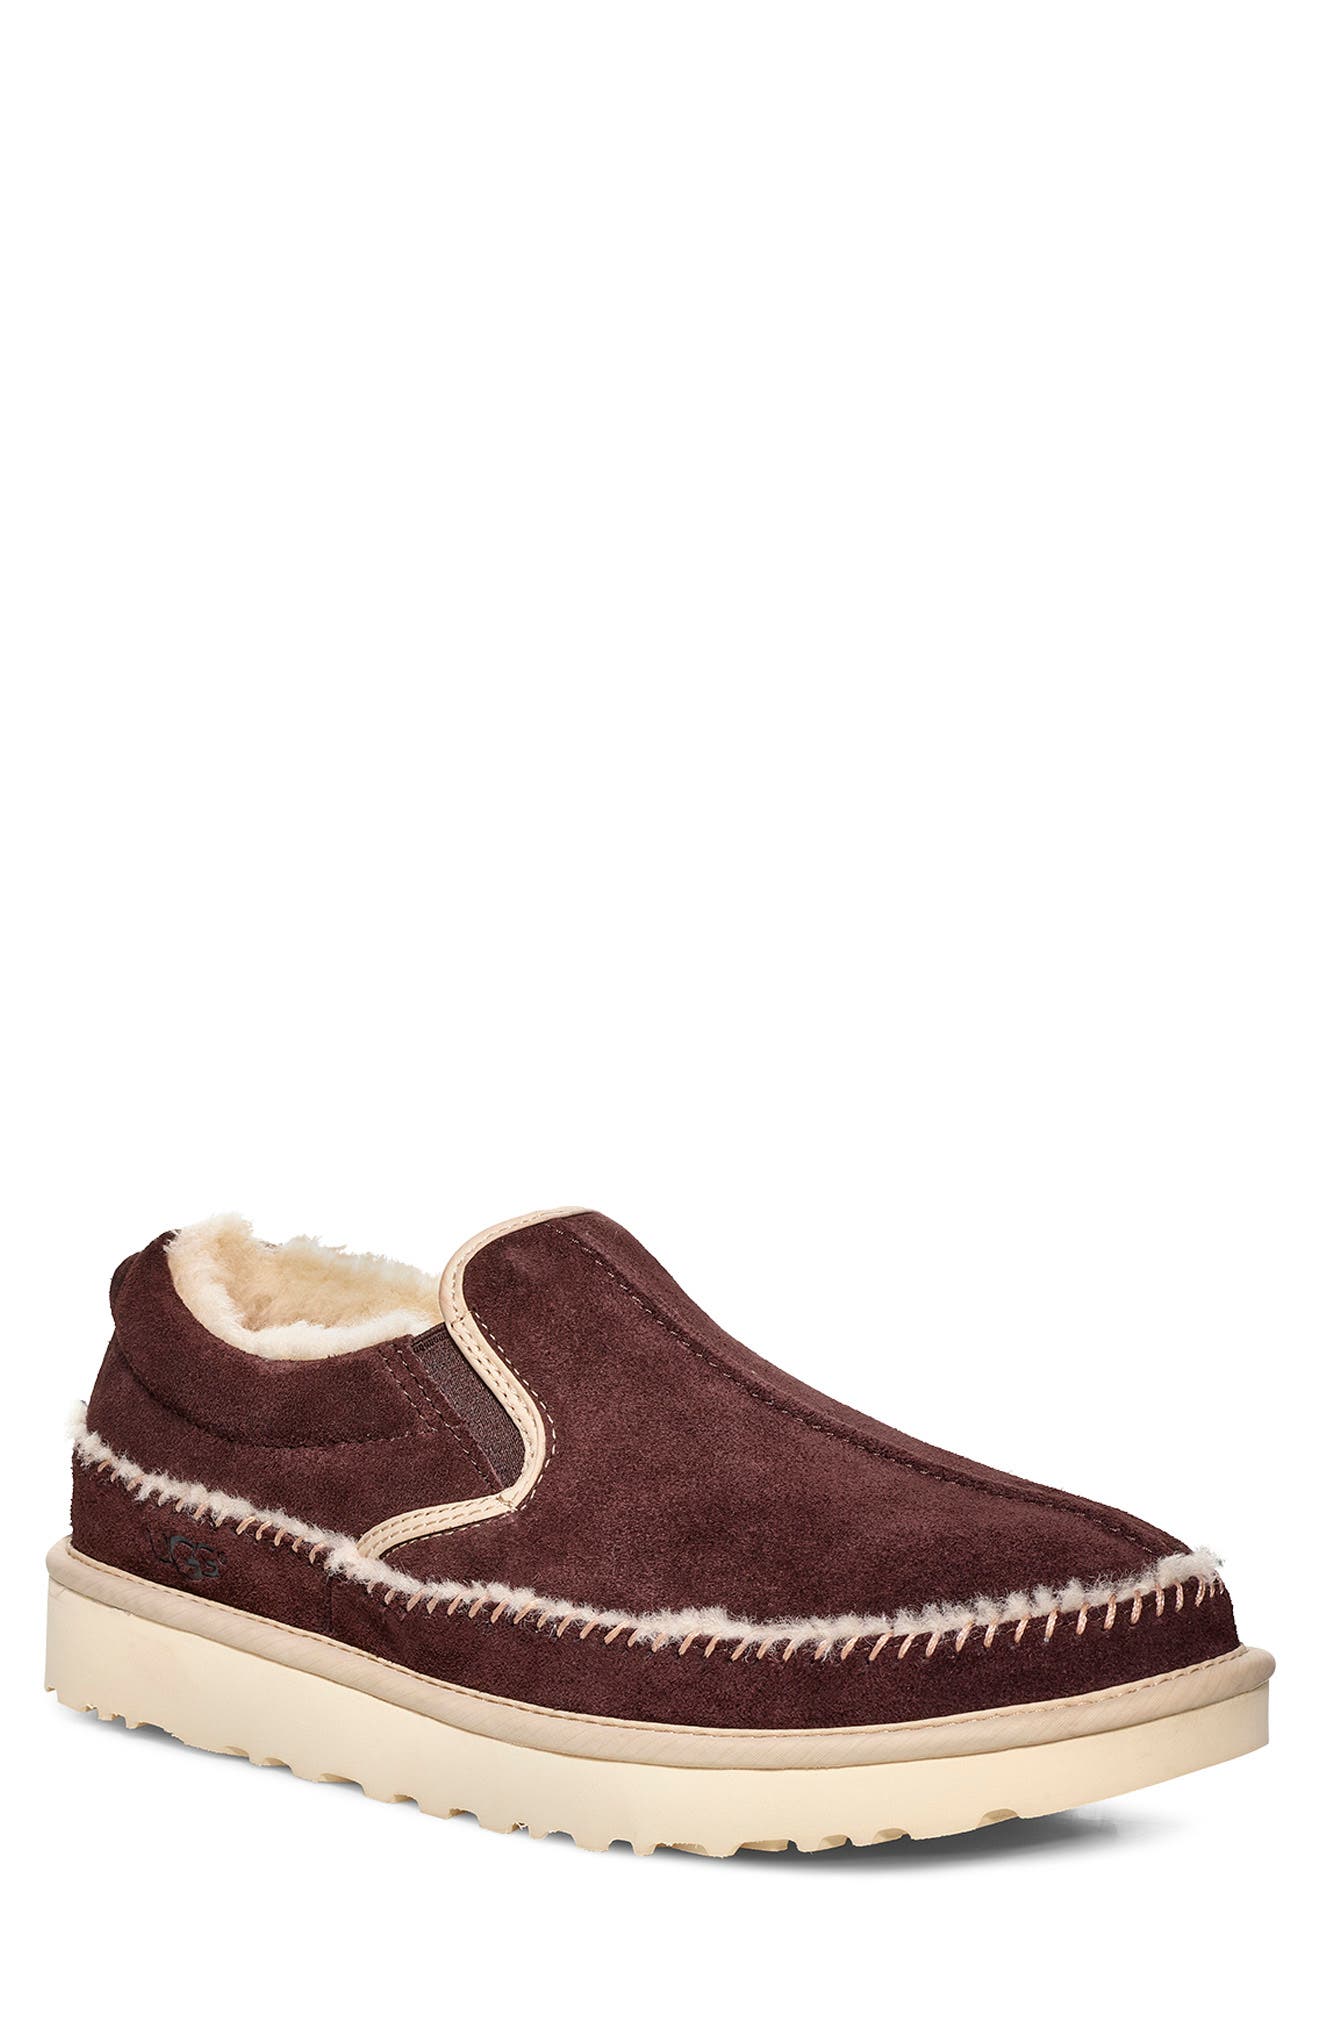 UGG | Neumel Suede Faux Shearling Lined 